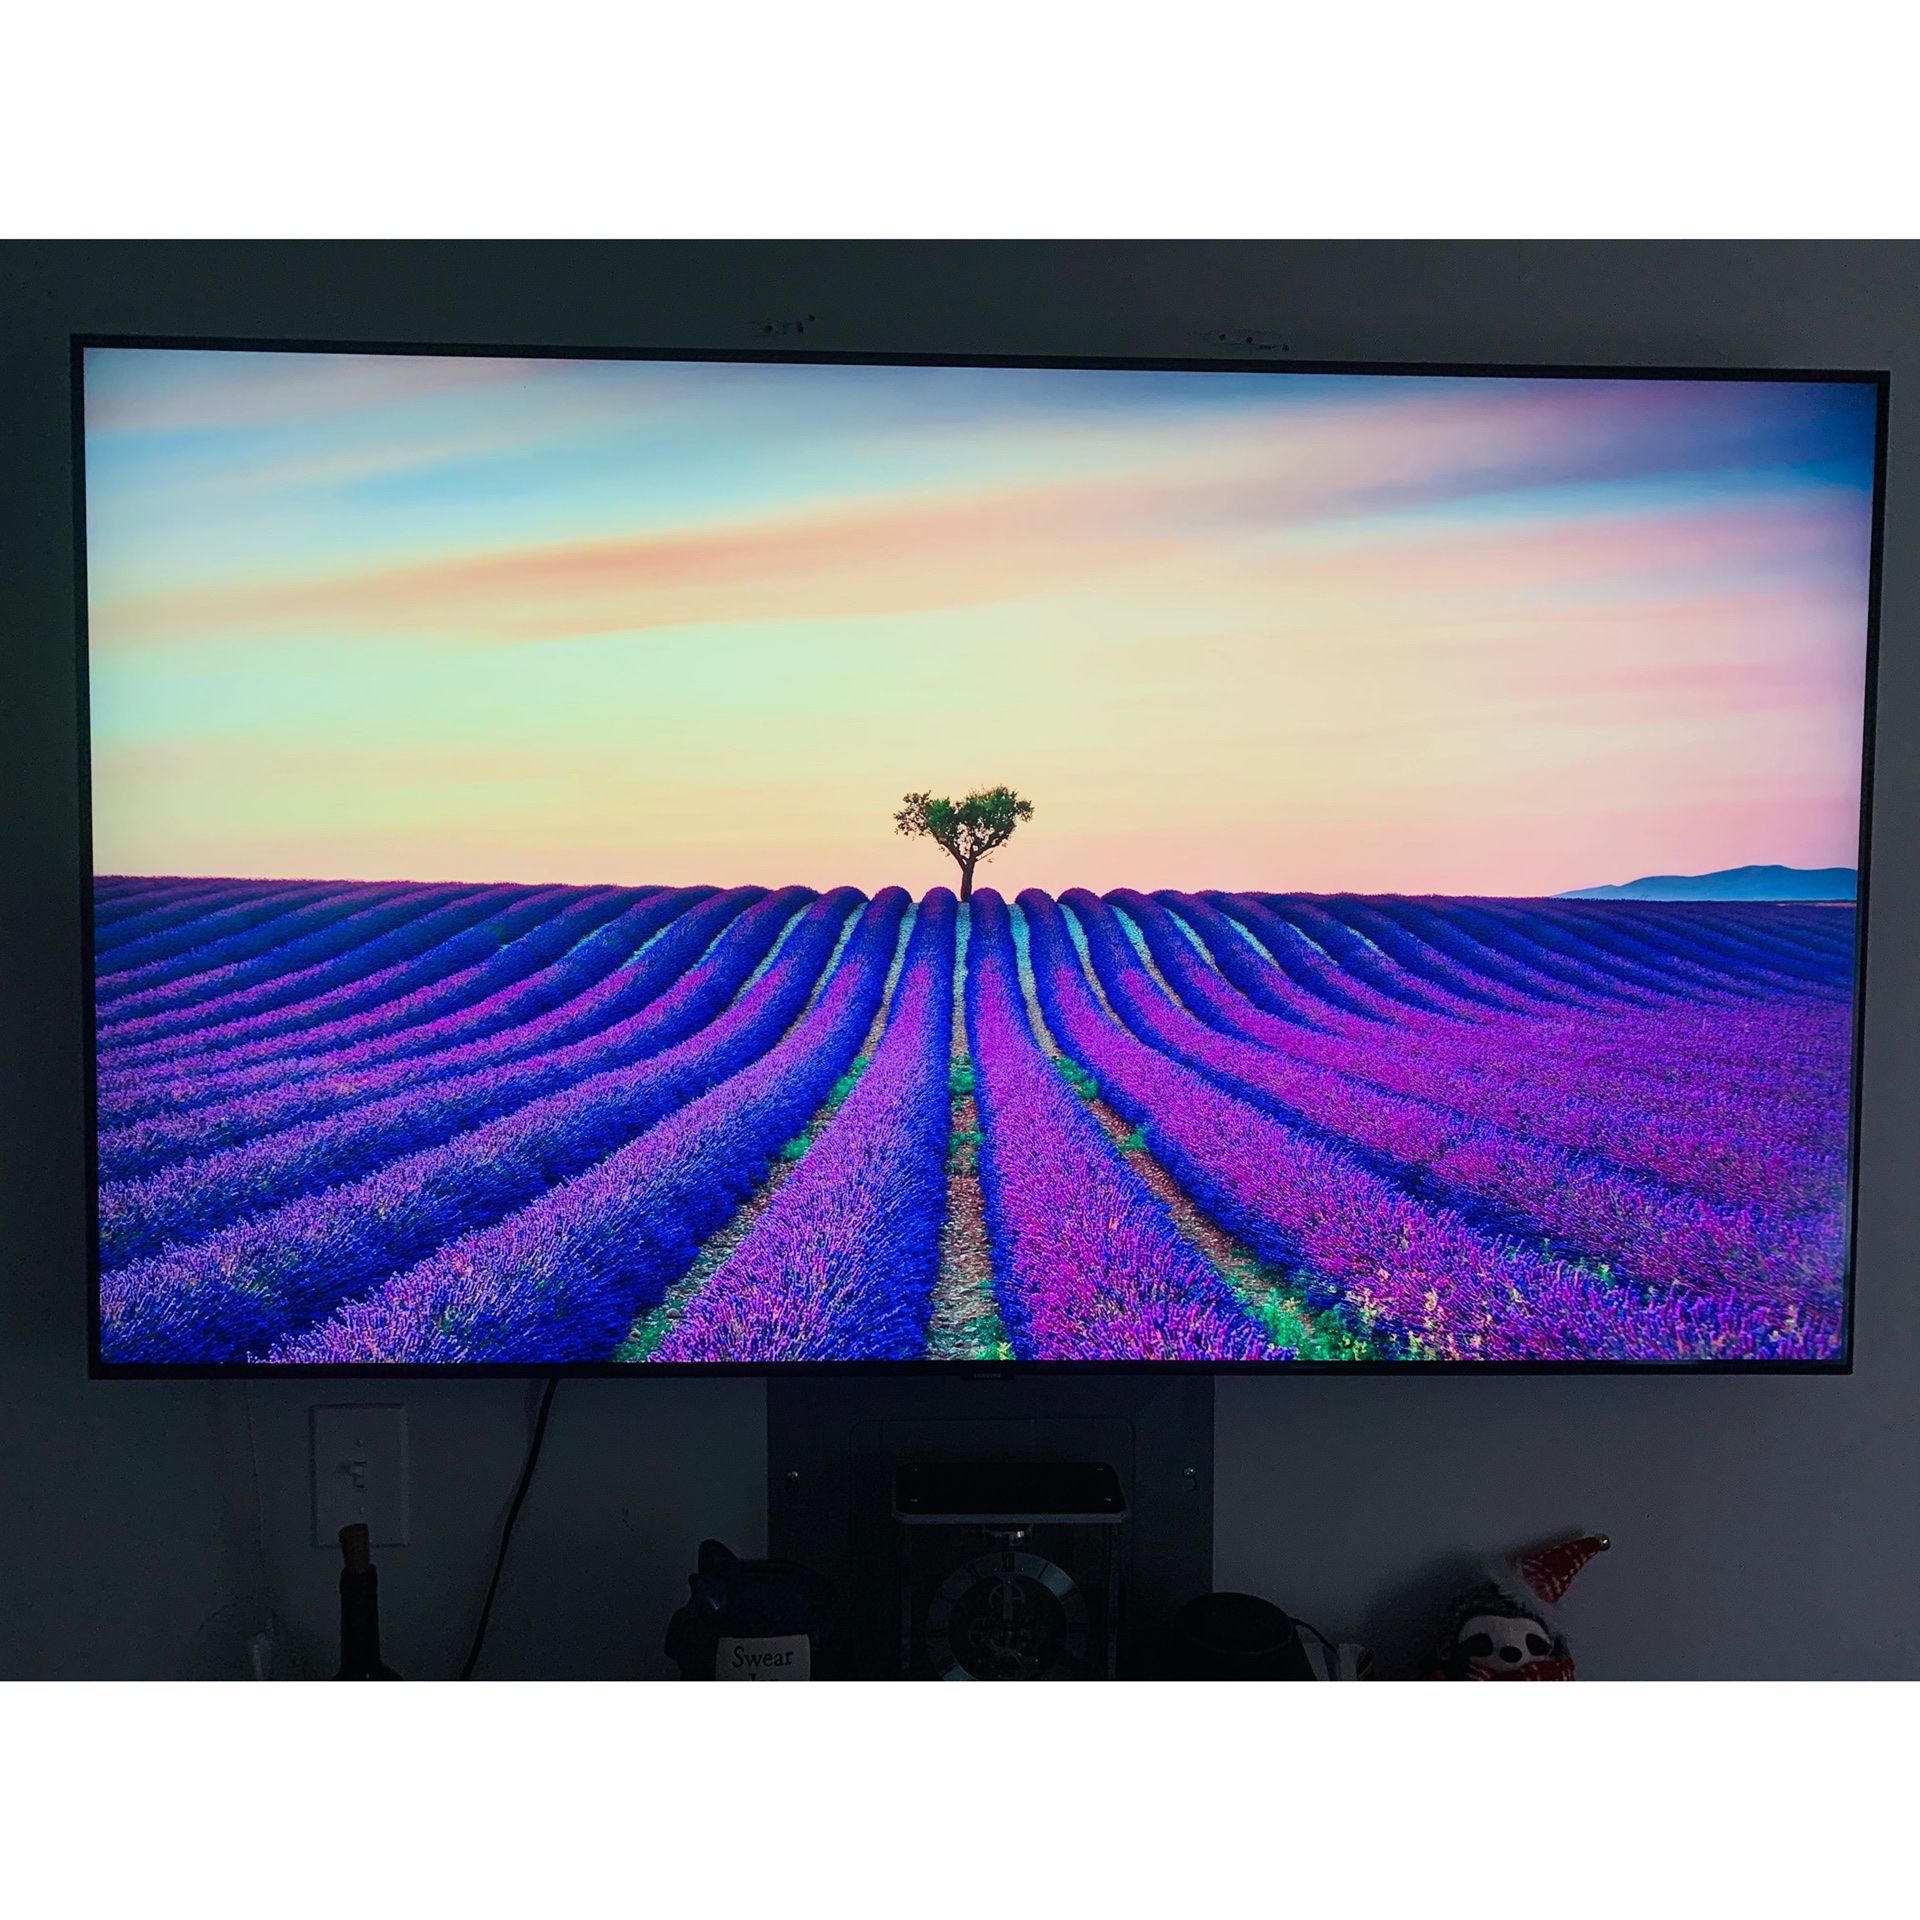 Stunning Samsung Q70 Series 65-Inch Smart TV, Flat QLED 4K UHD With Wall Mount, MOVING OUT SALE !!